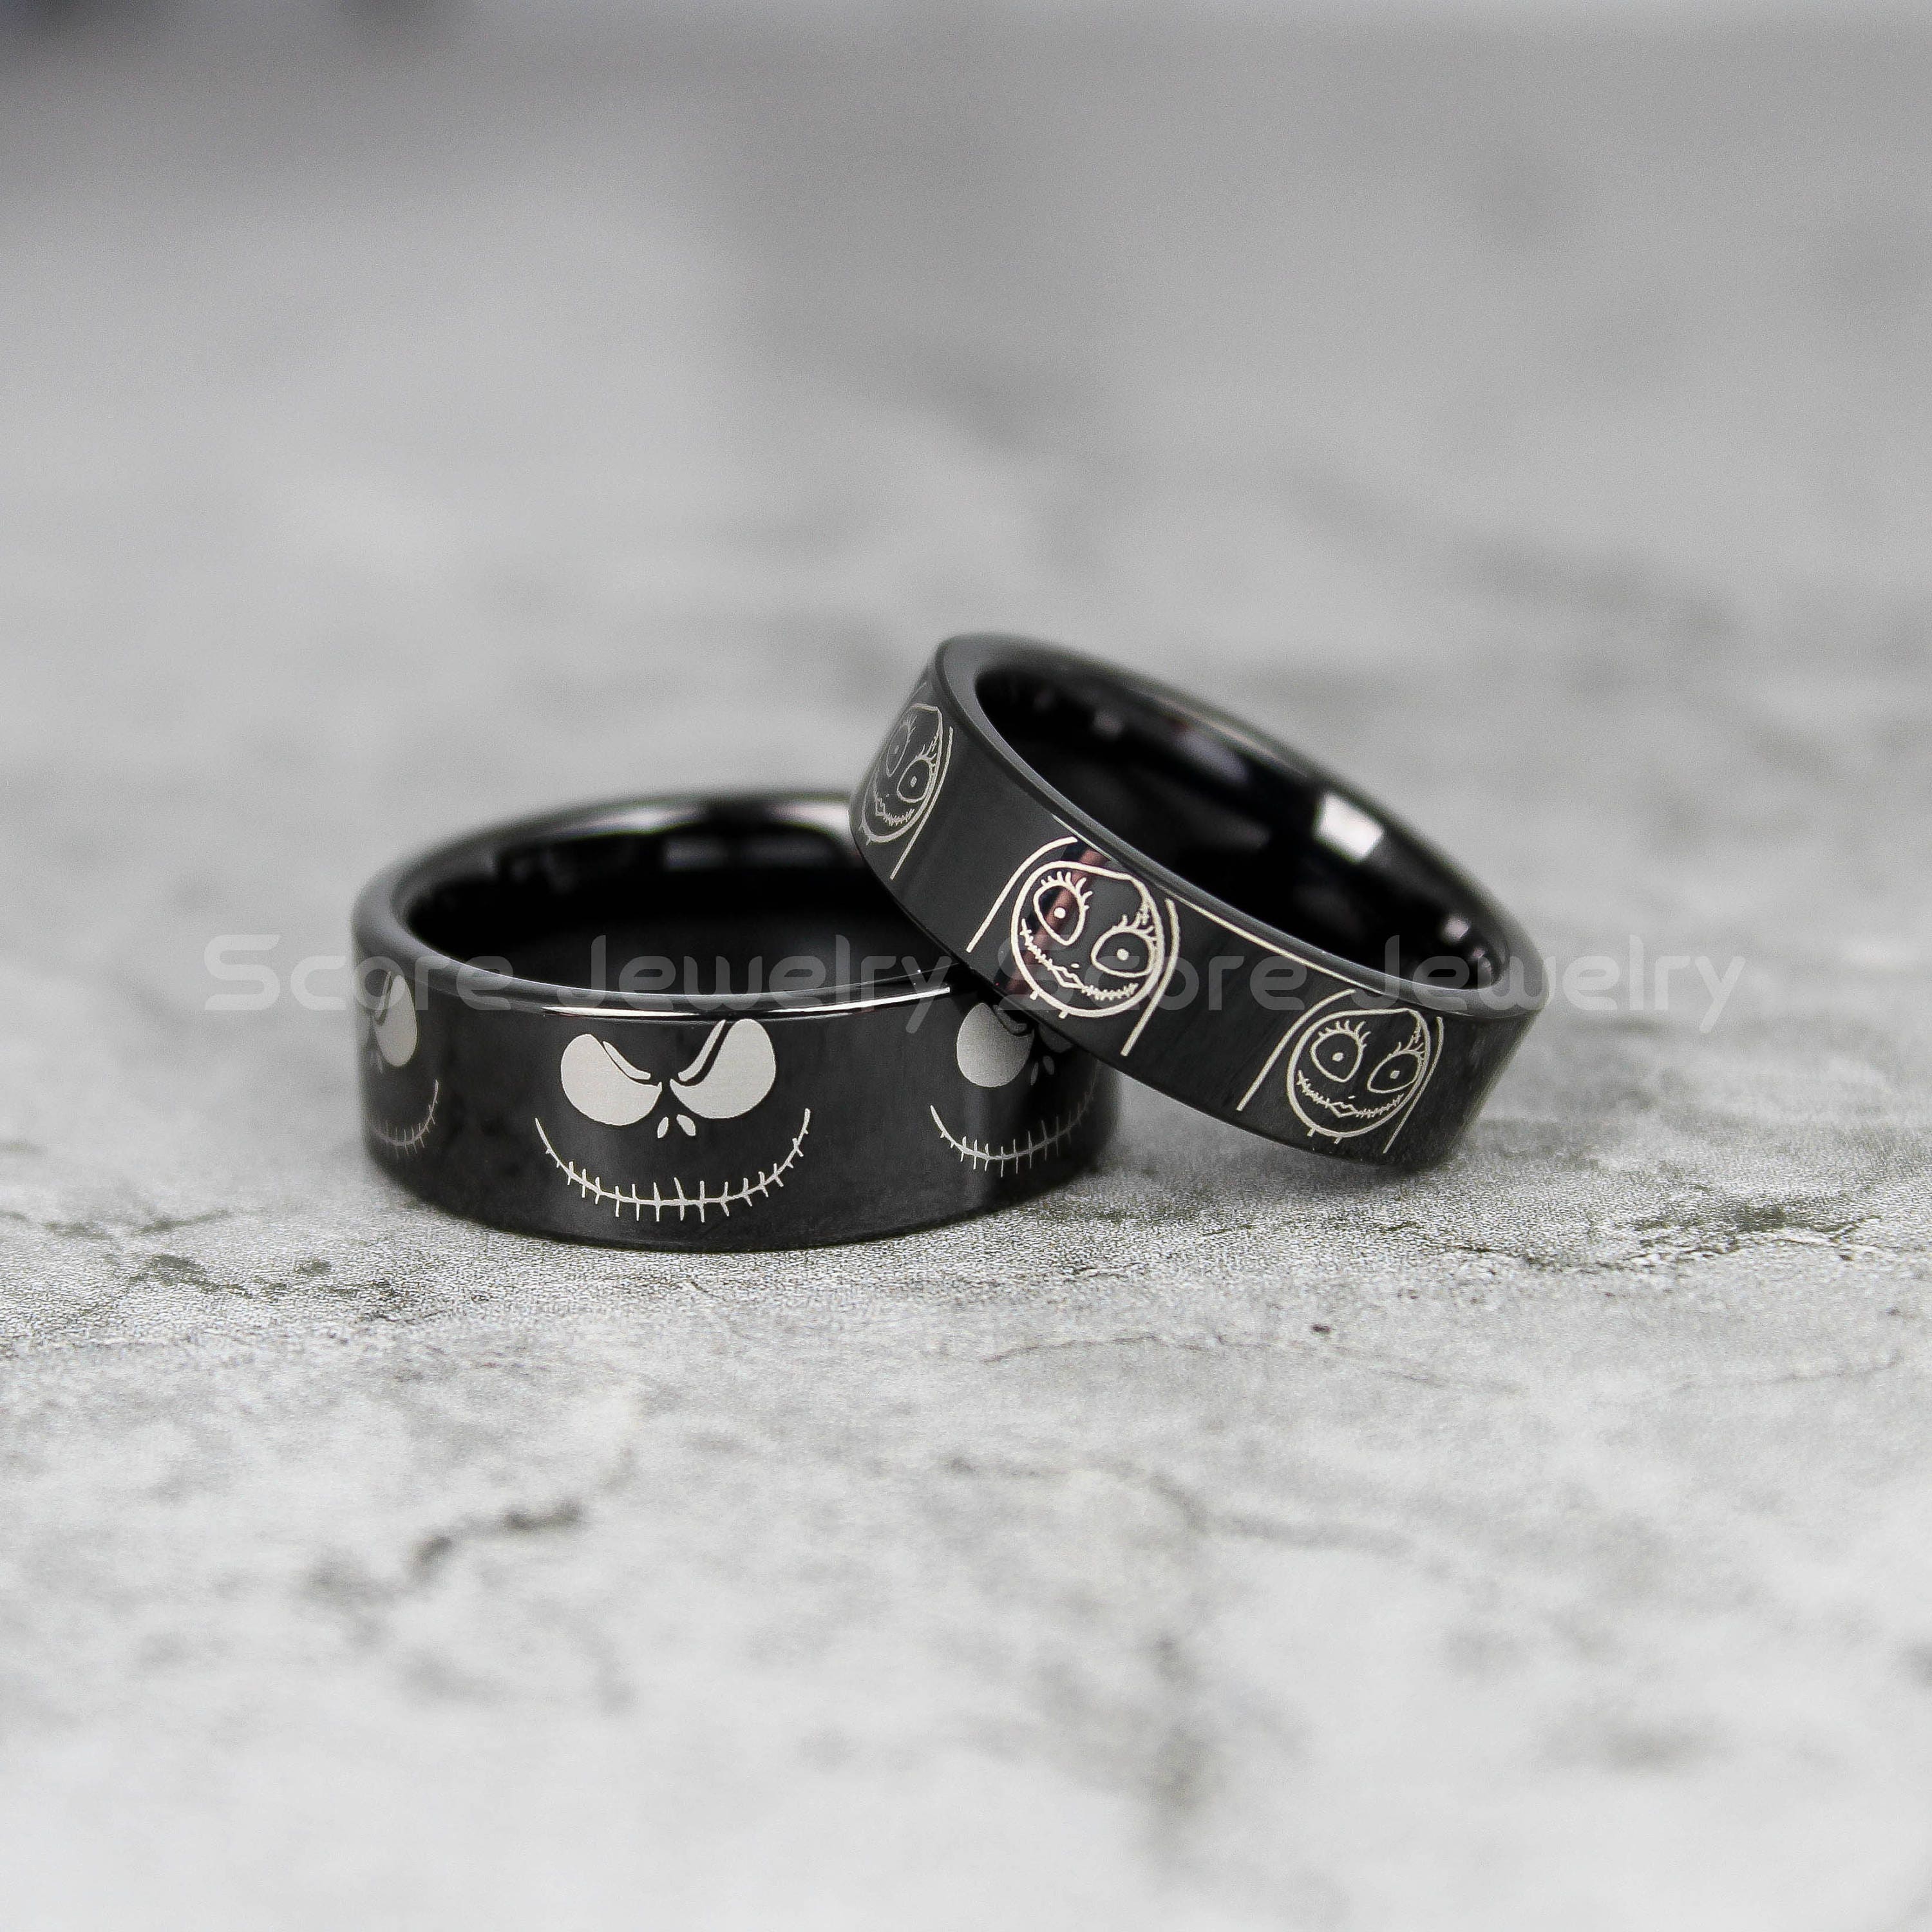 Jack and Sally Rings 2 Piece Couple Set Black Tungsten Bands Etsy